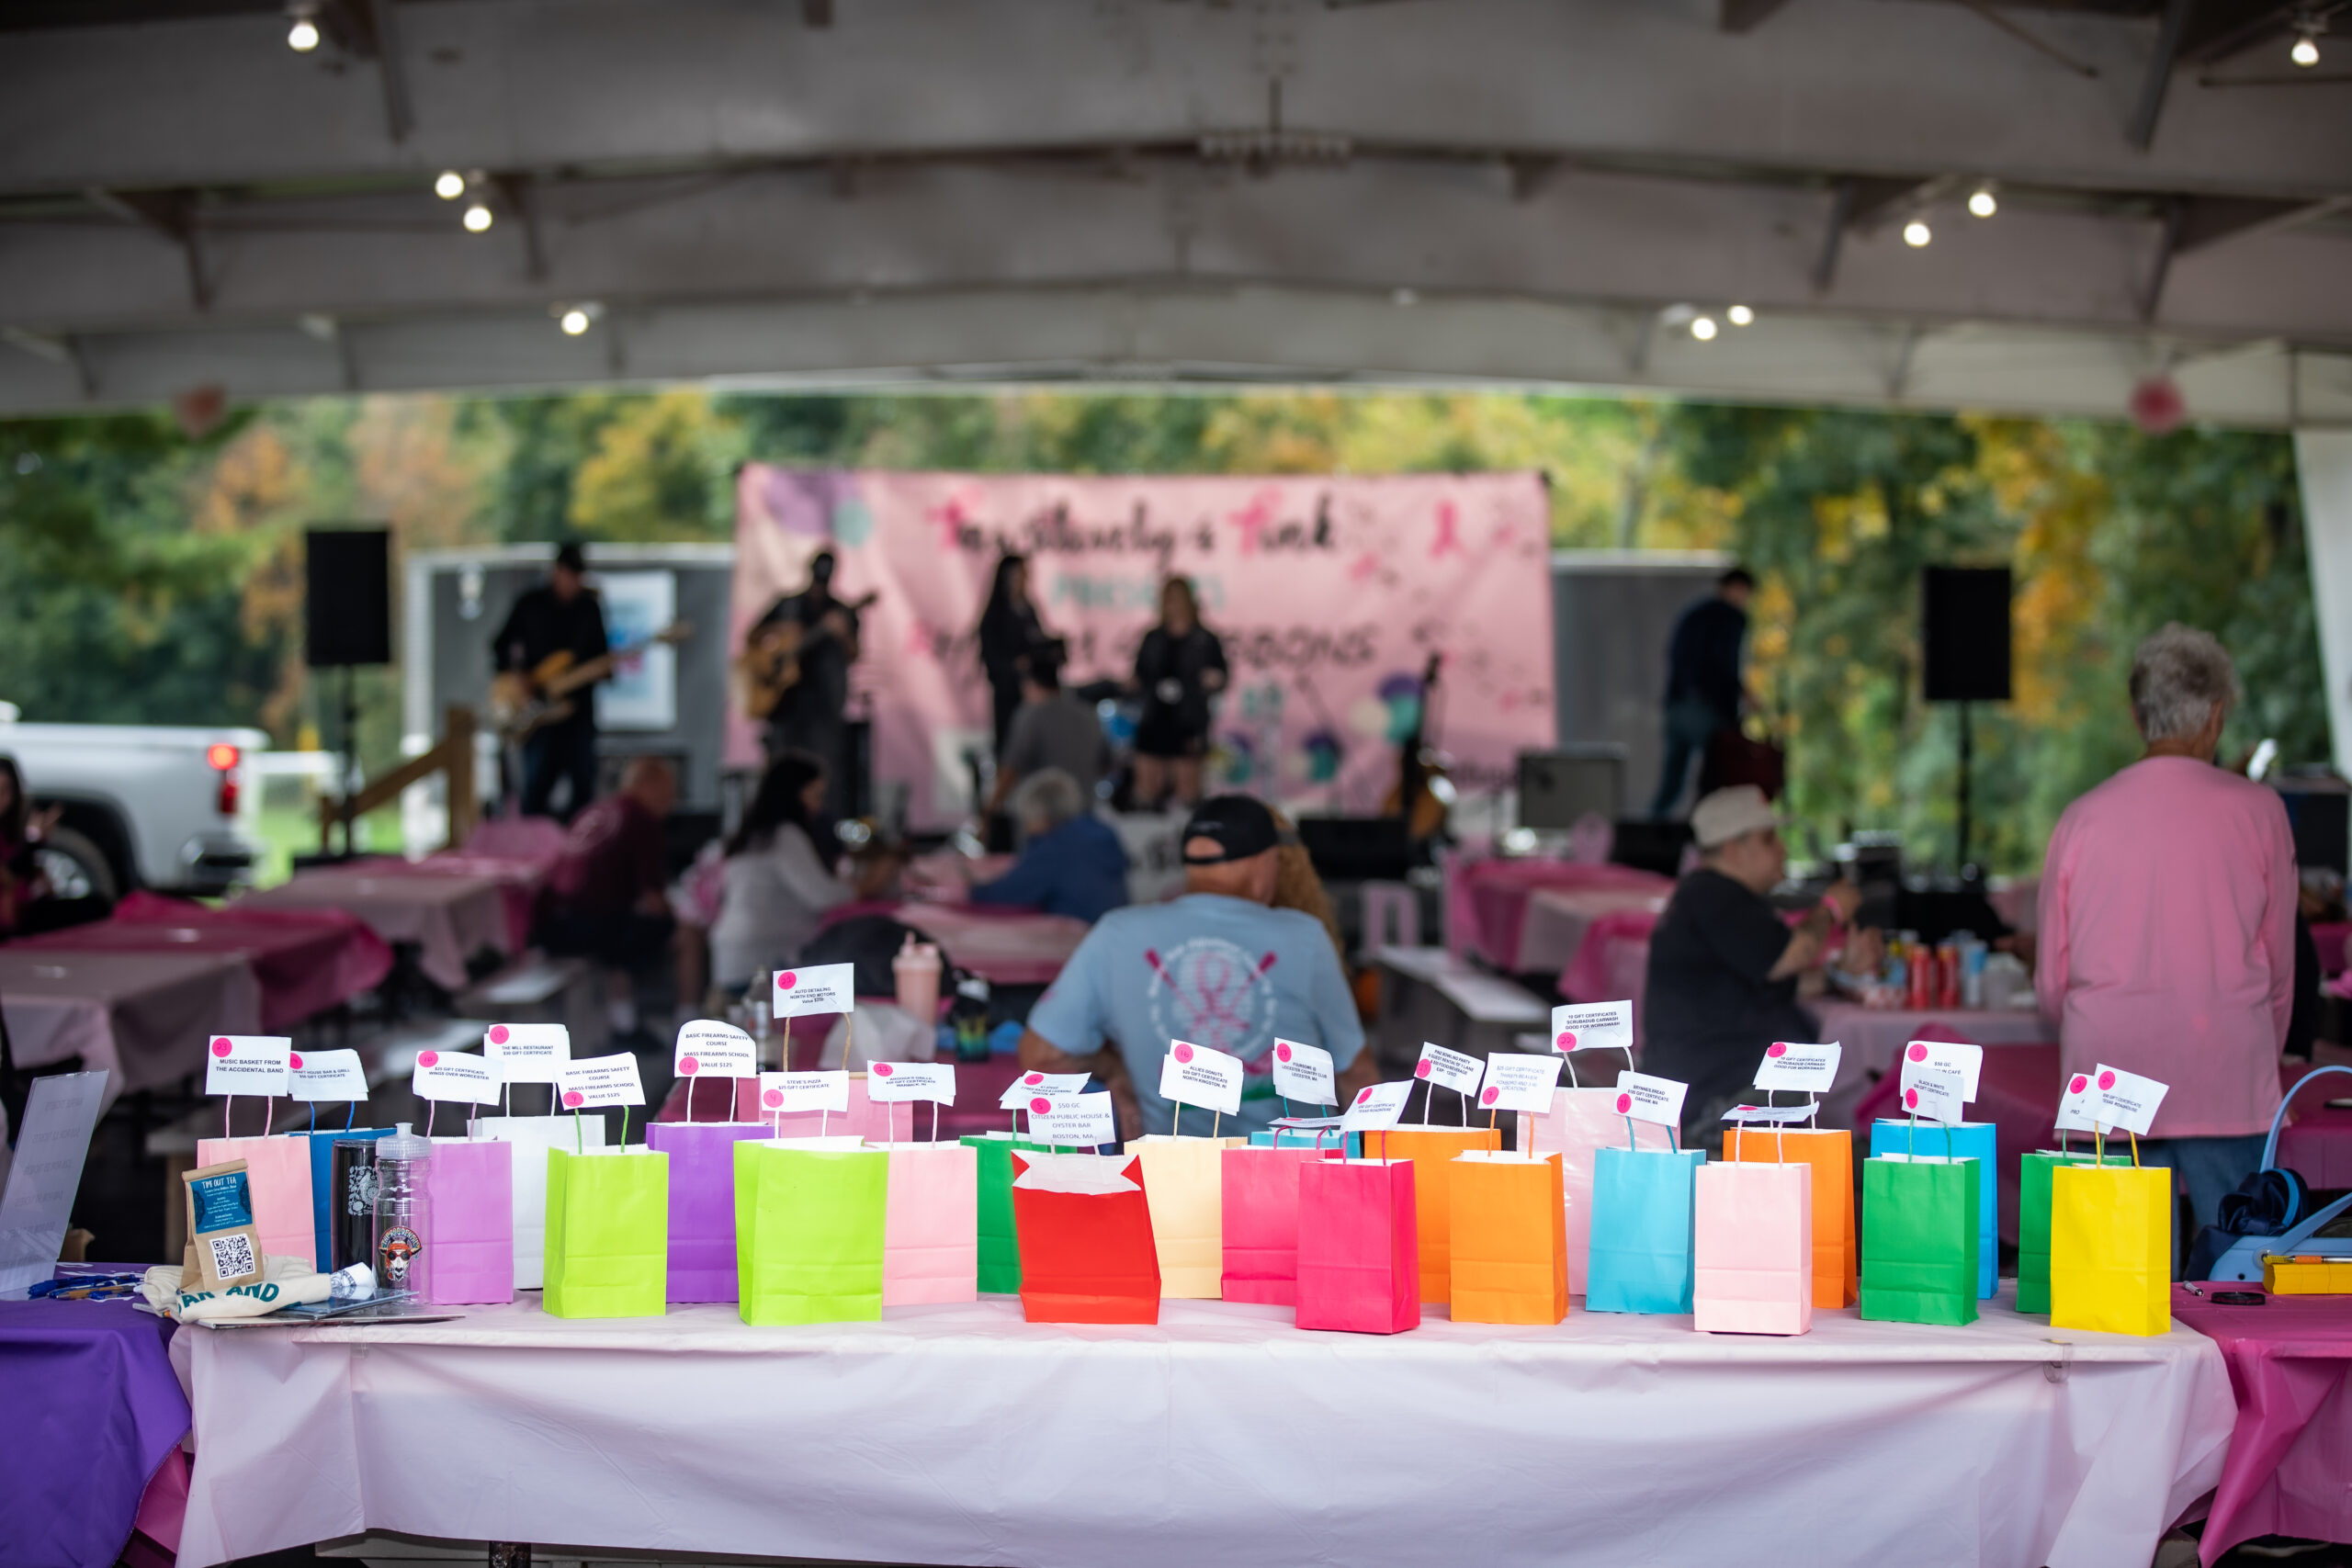 This is an image from local nonprofit, Pawsitively 4 Pink hosting an event to raise money for women with breast cancer in Worcester, MA.